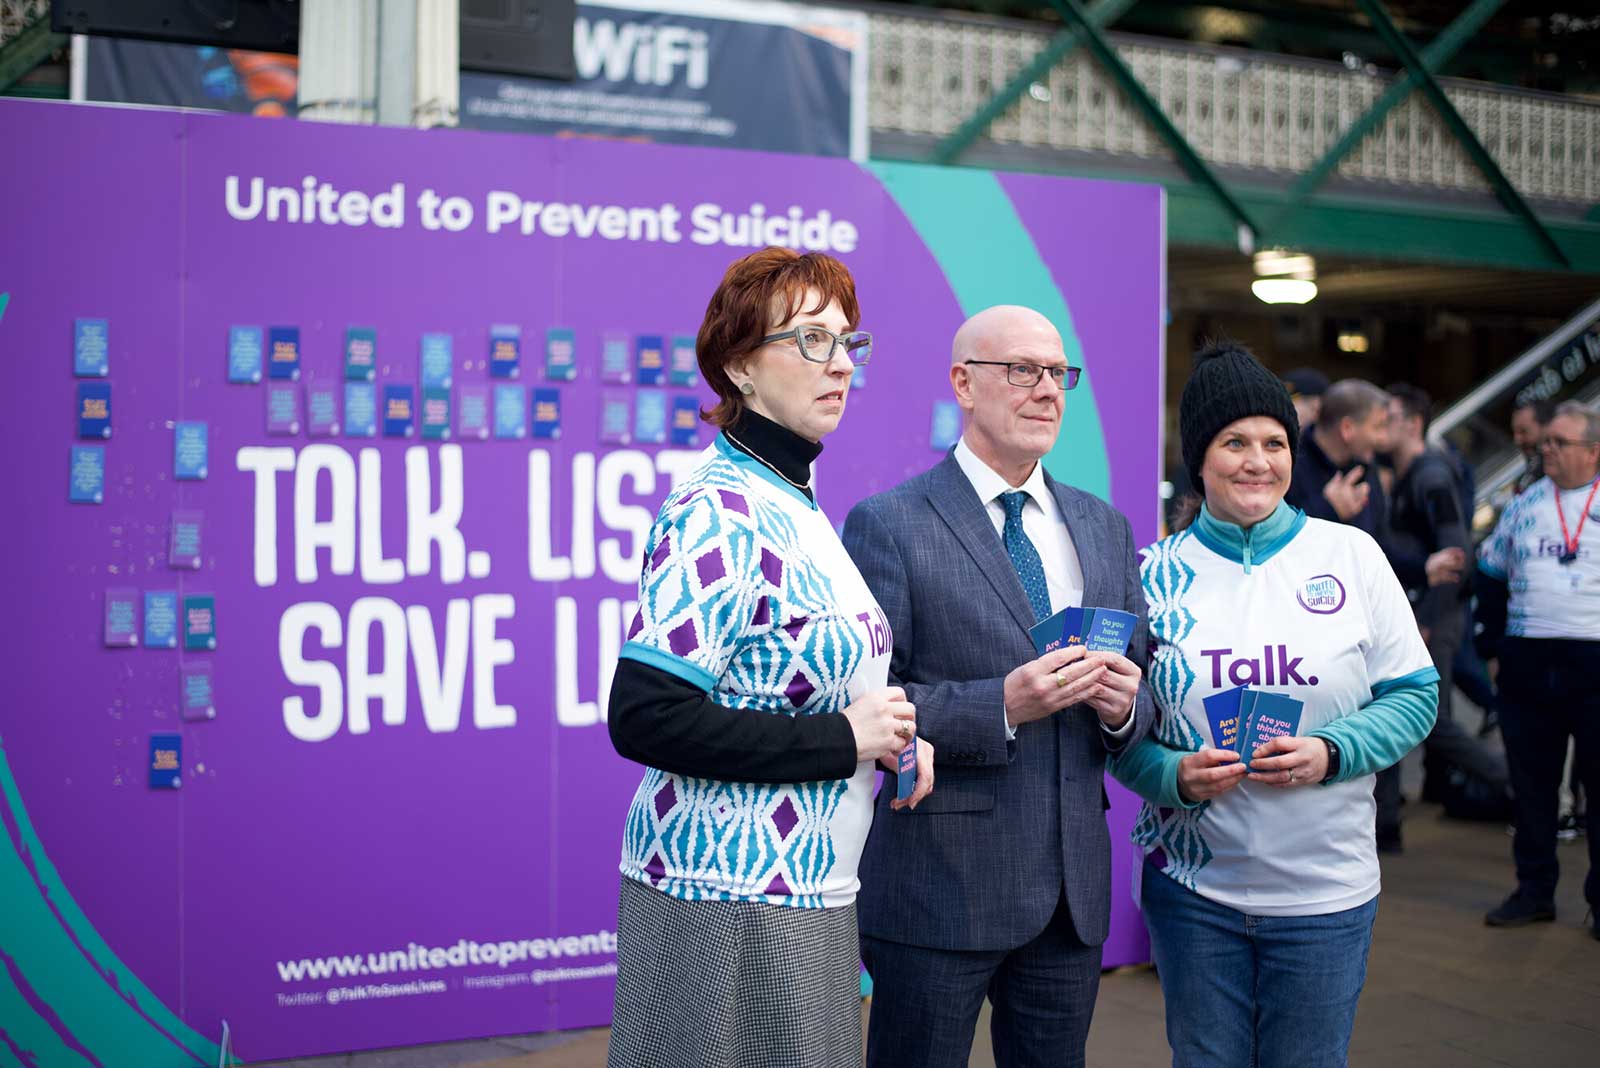 United to Prevent Suicide